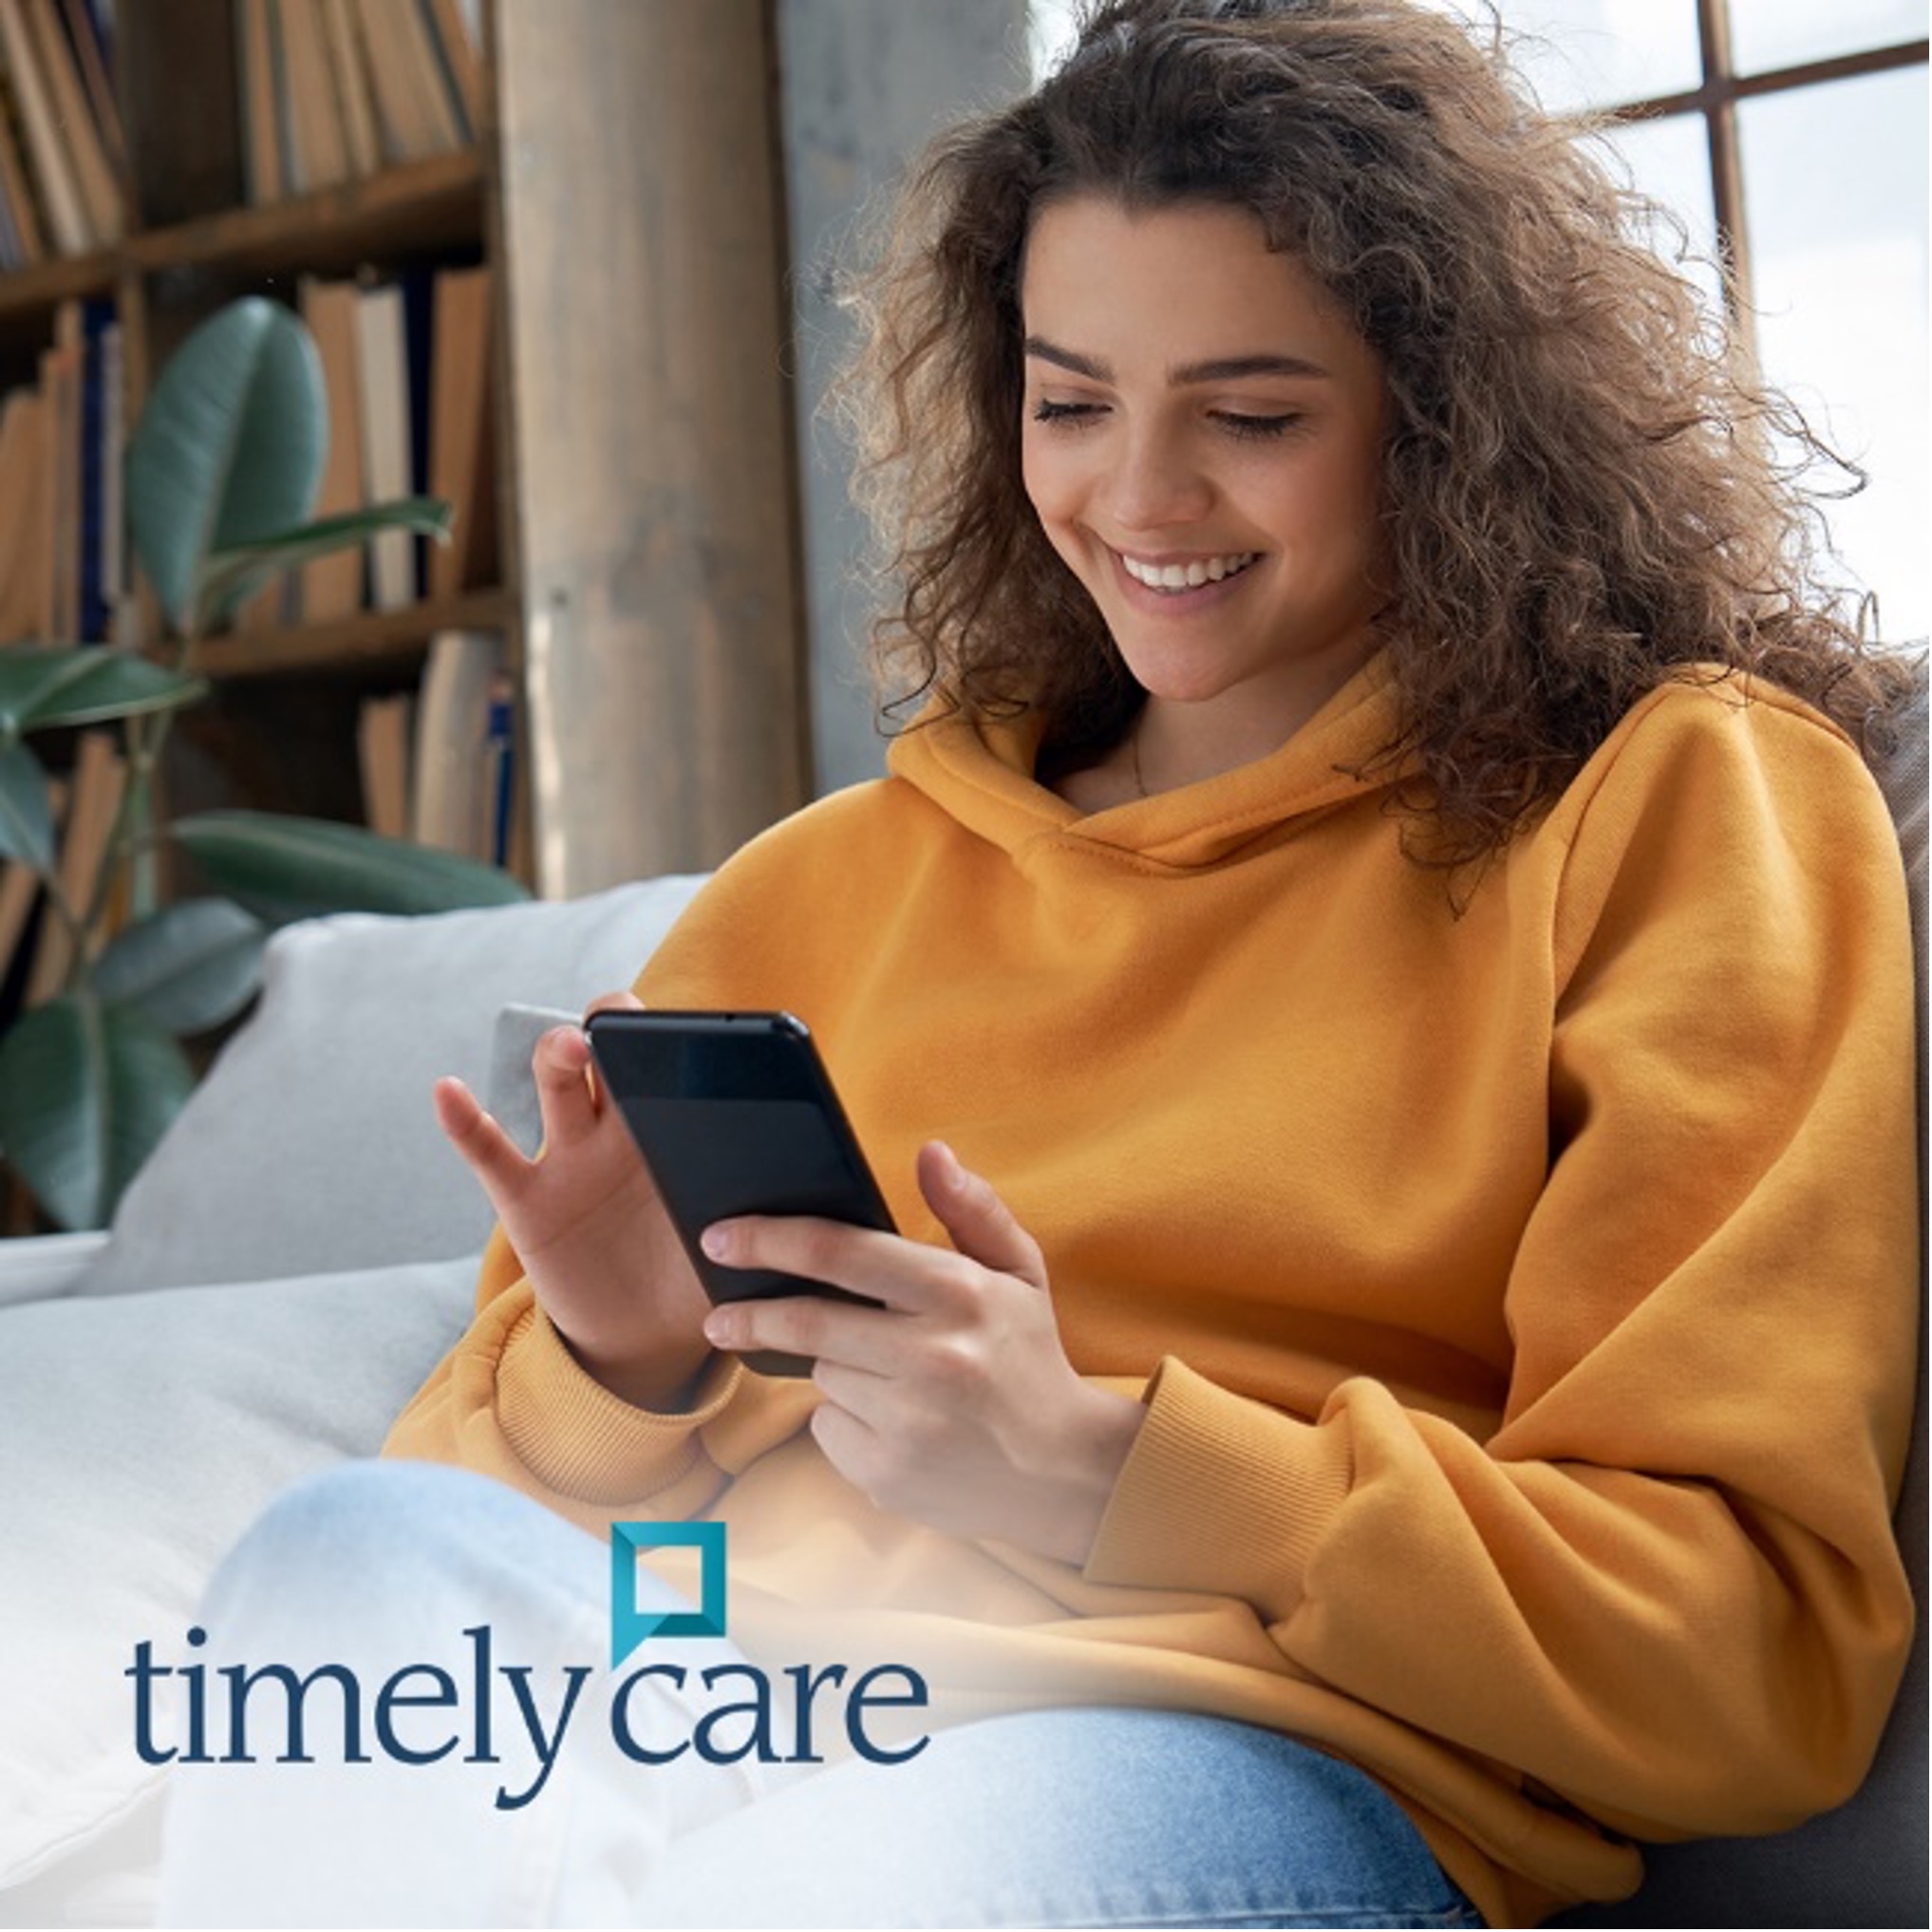 Photo of woman holding phone with TimelyCare logo.